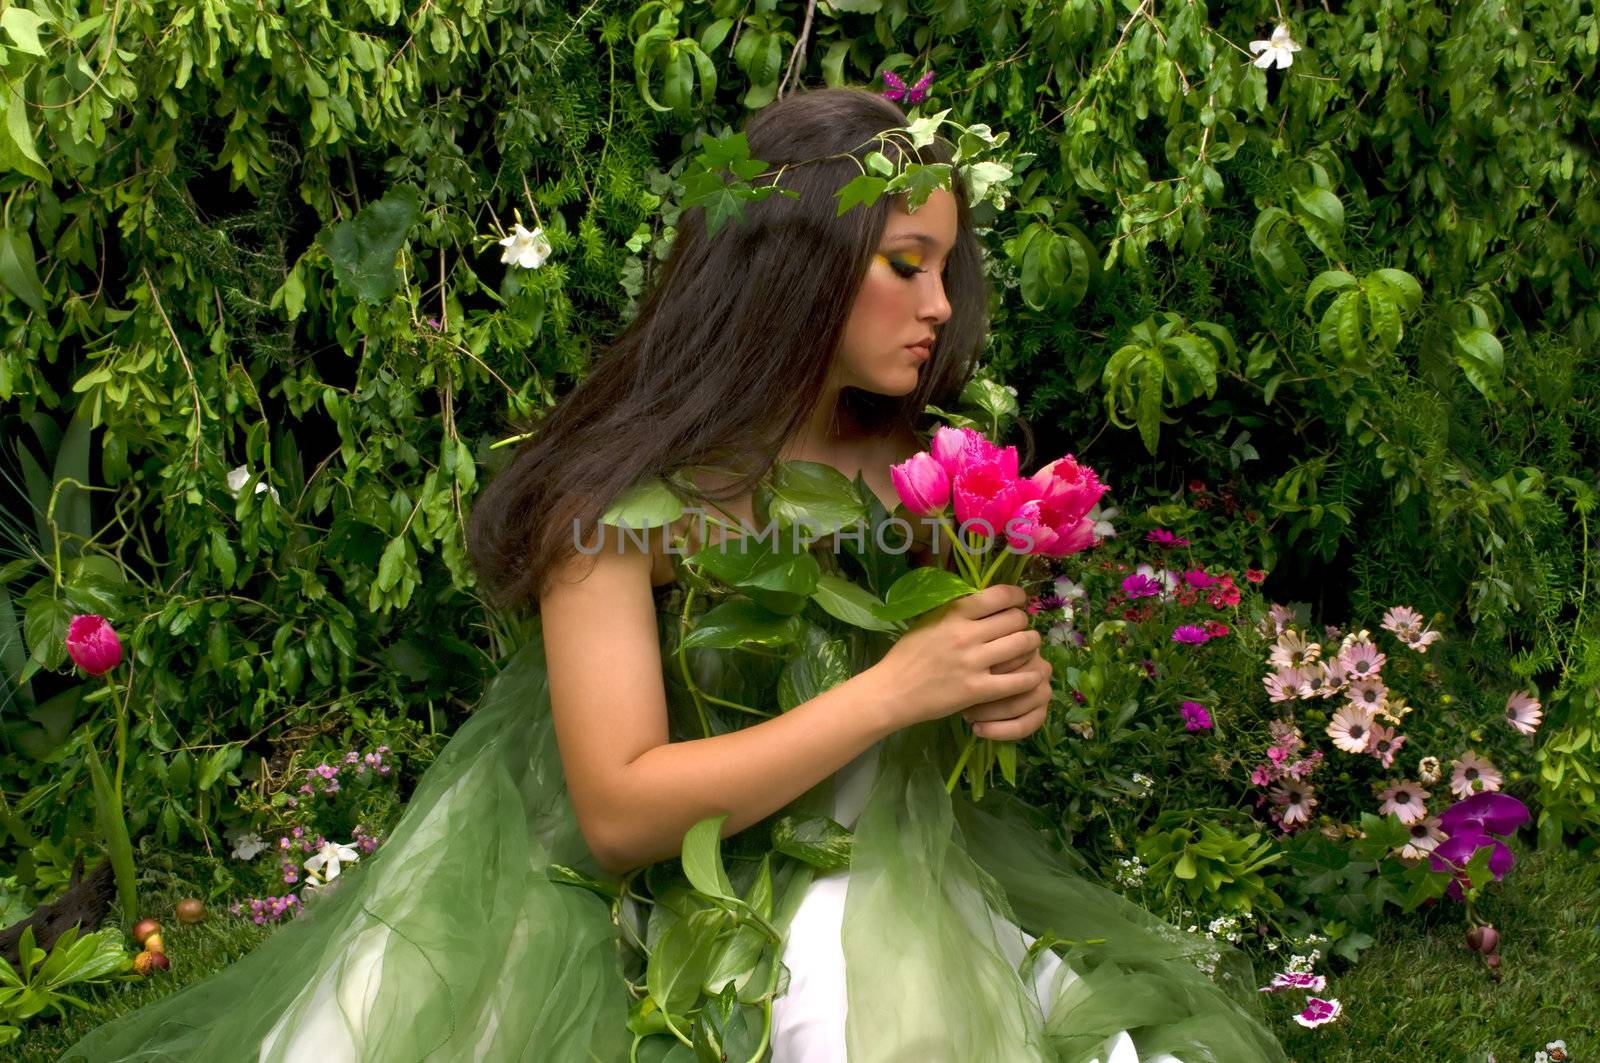 Mother Nature looking upon some of her many beautiful creations in her enchanted garden
This indoor studio shoot is a compilation of many fresh flowers, grass, tree branches and bushes. 

